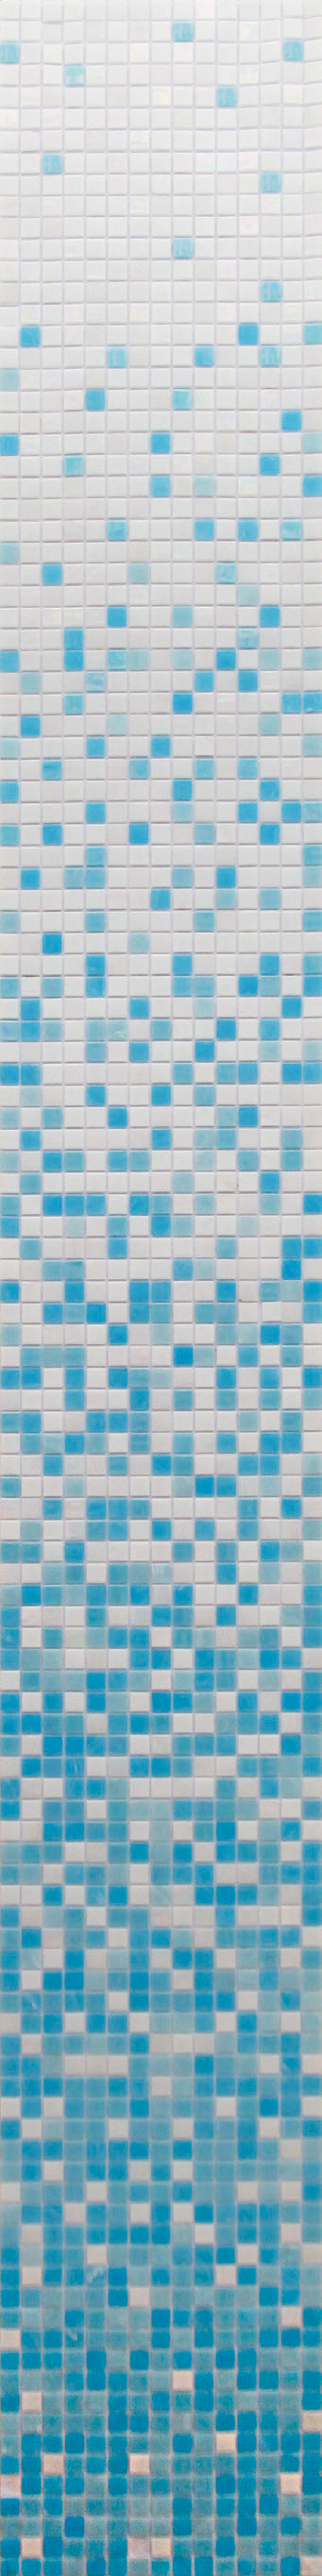 mir alma gradients 0_8 inch azure wall and floor mosaic distributed by surface group natural materials